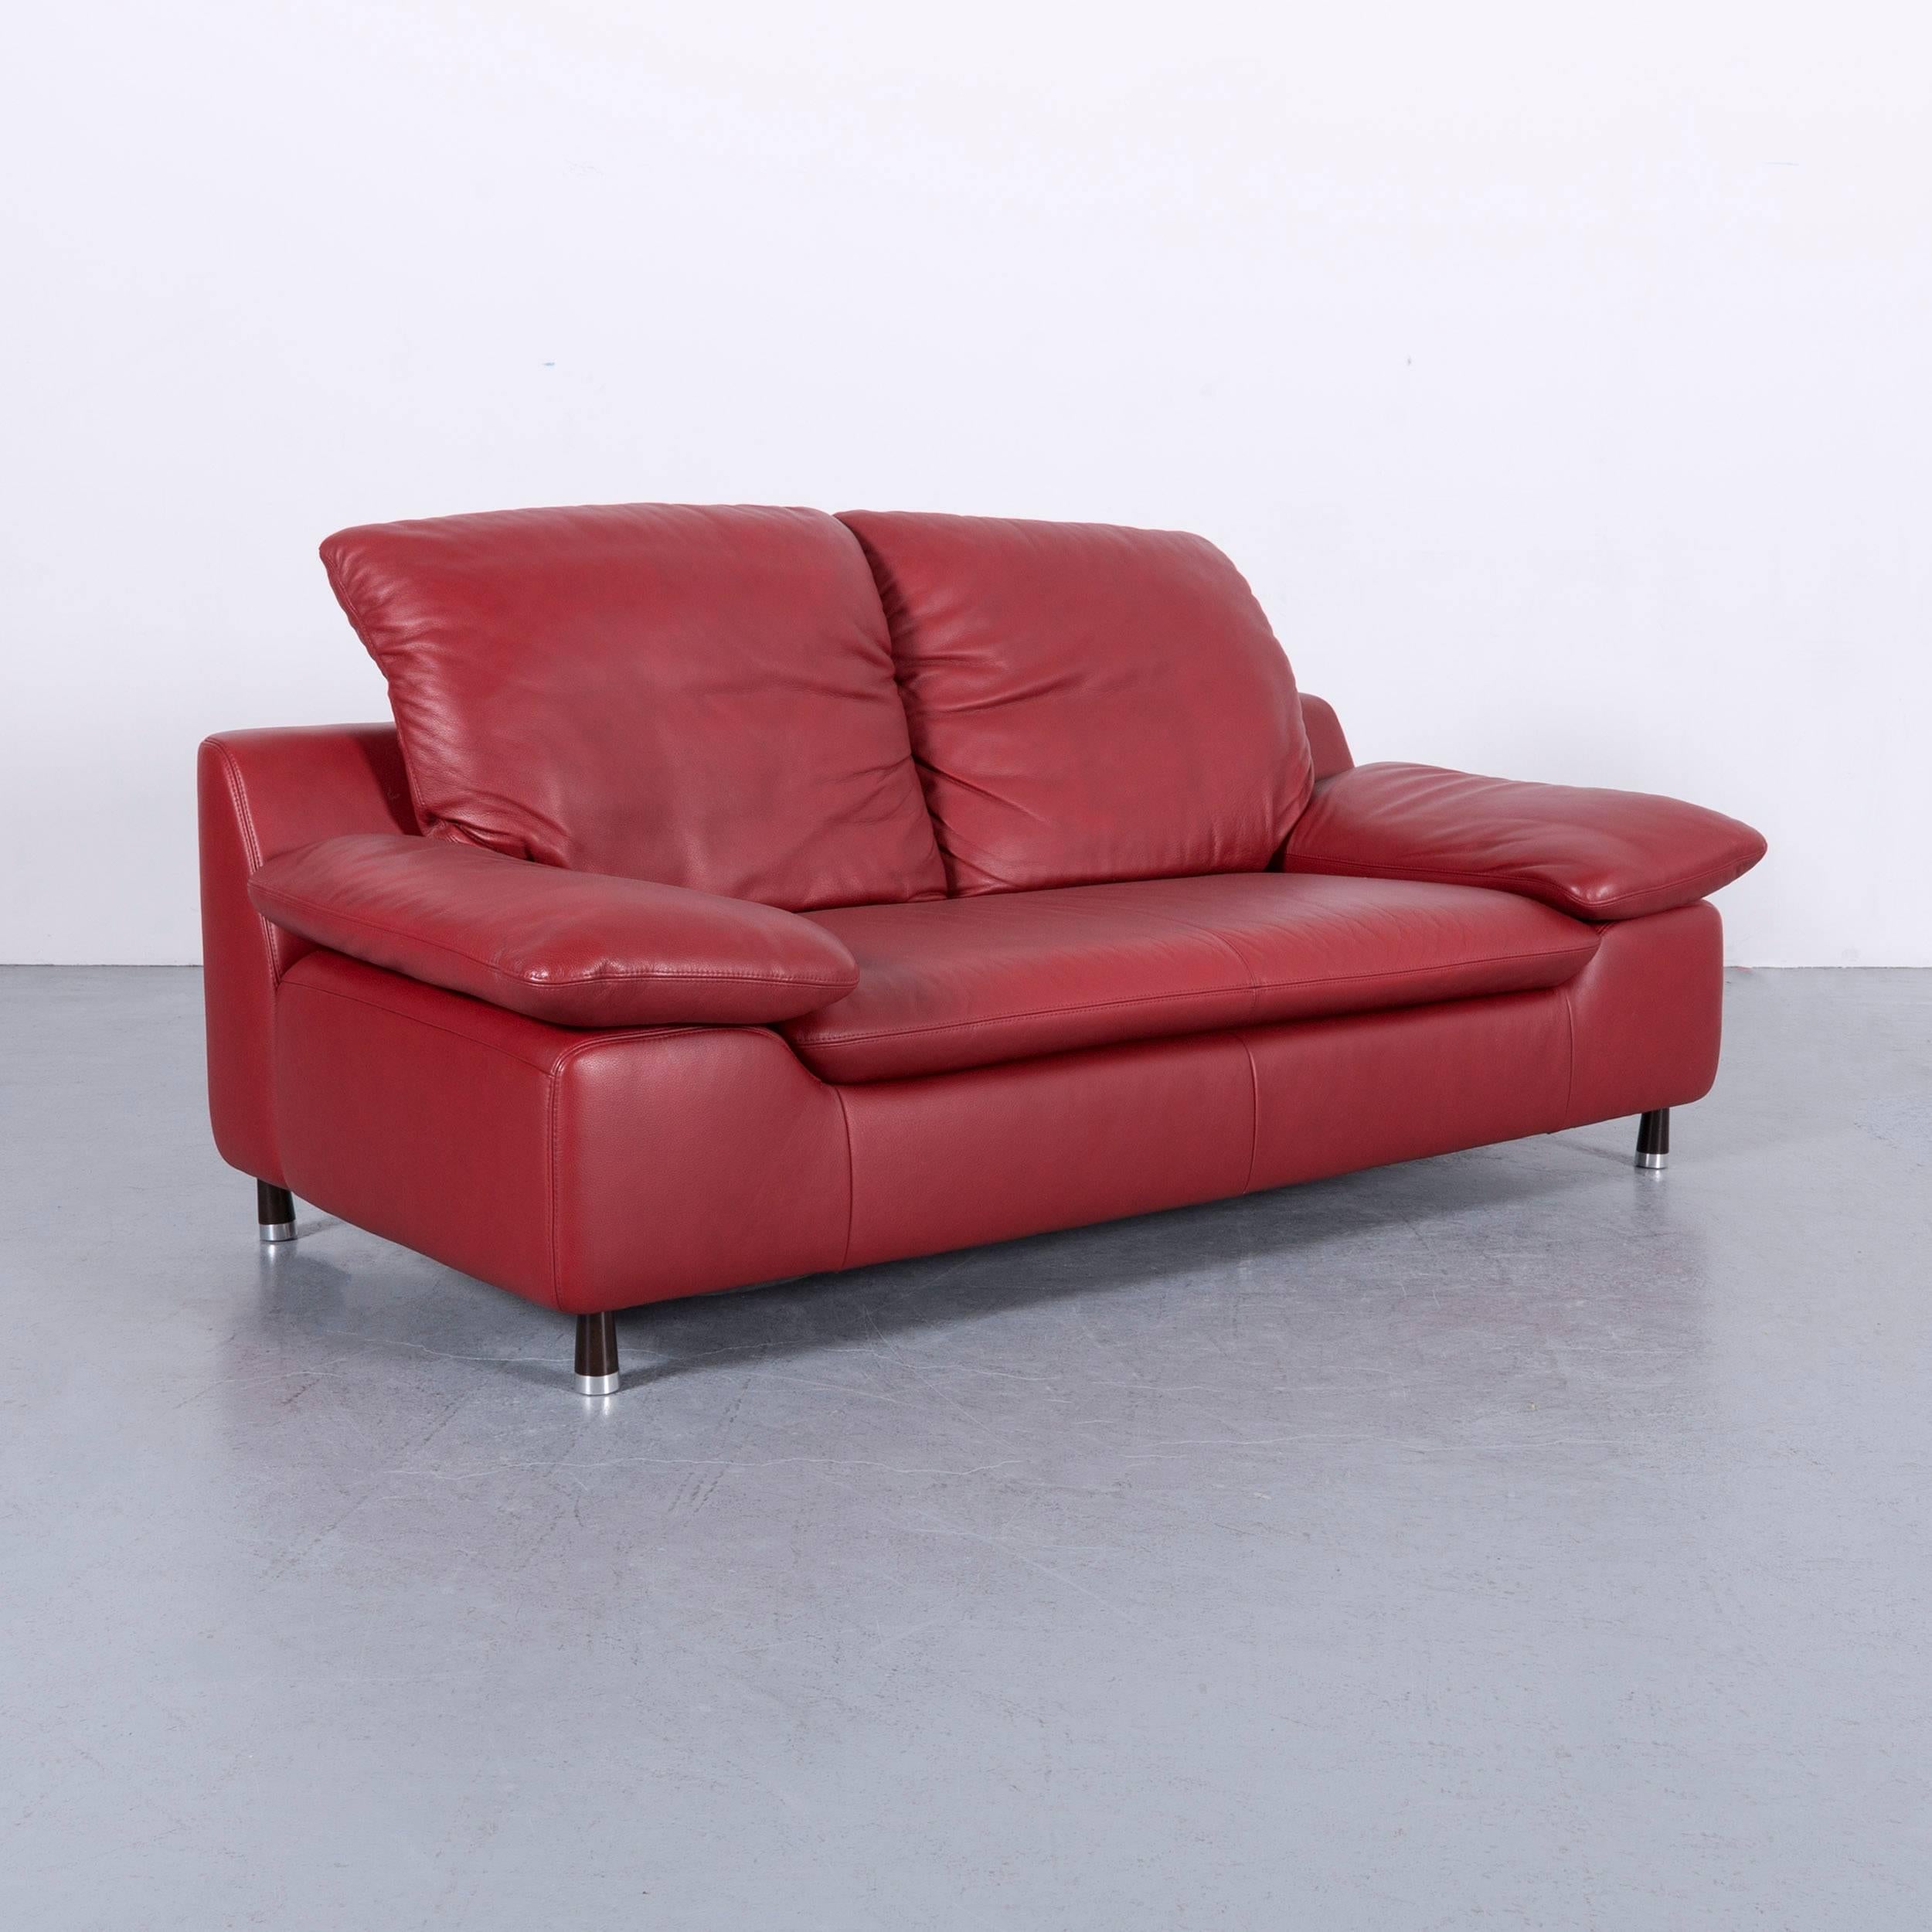 Contemporary Willi Schillig Leather Sofa Red Two-Seat Couch